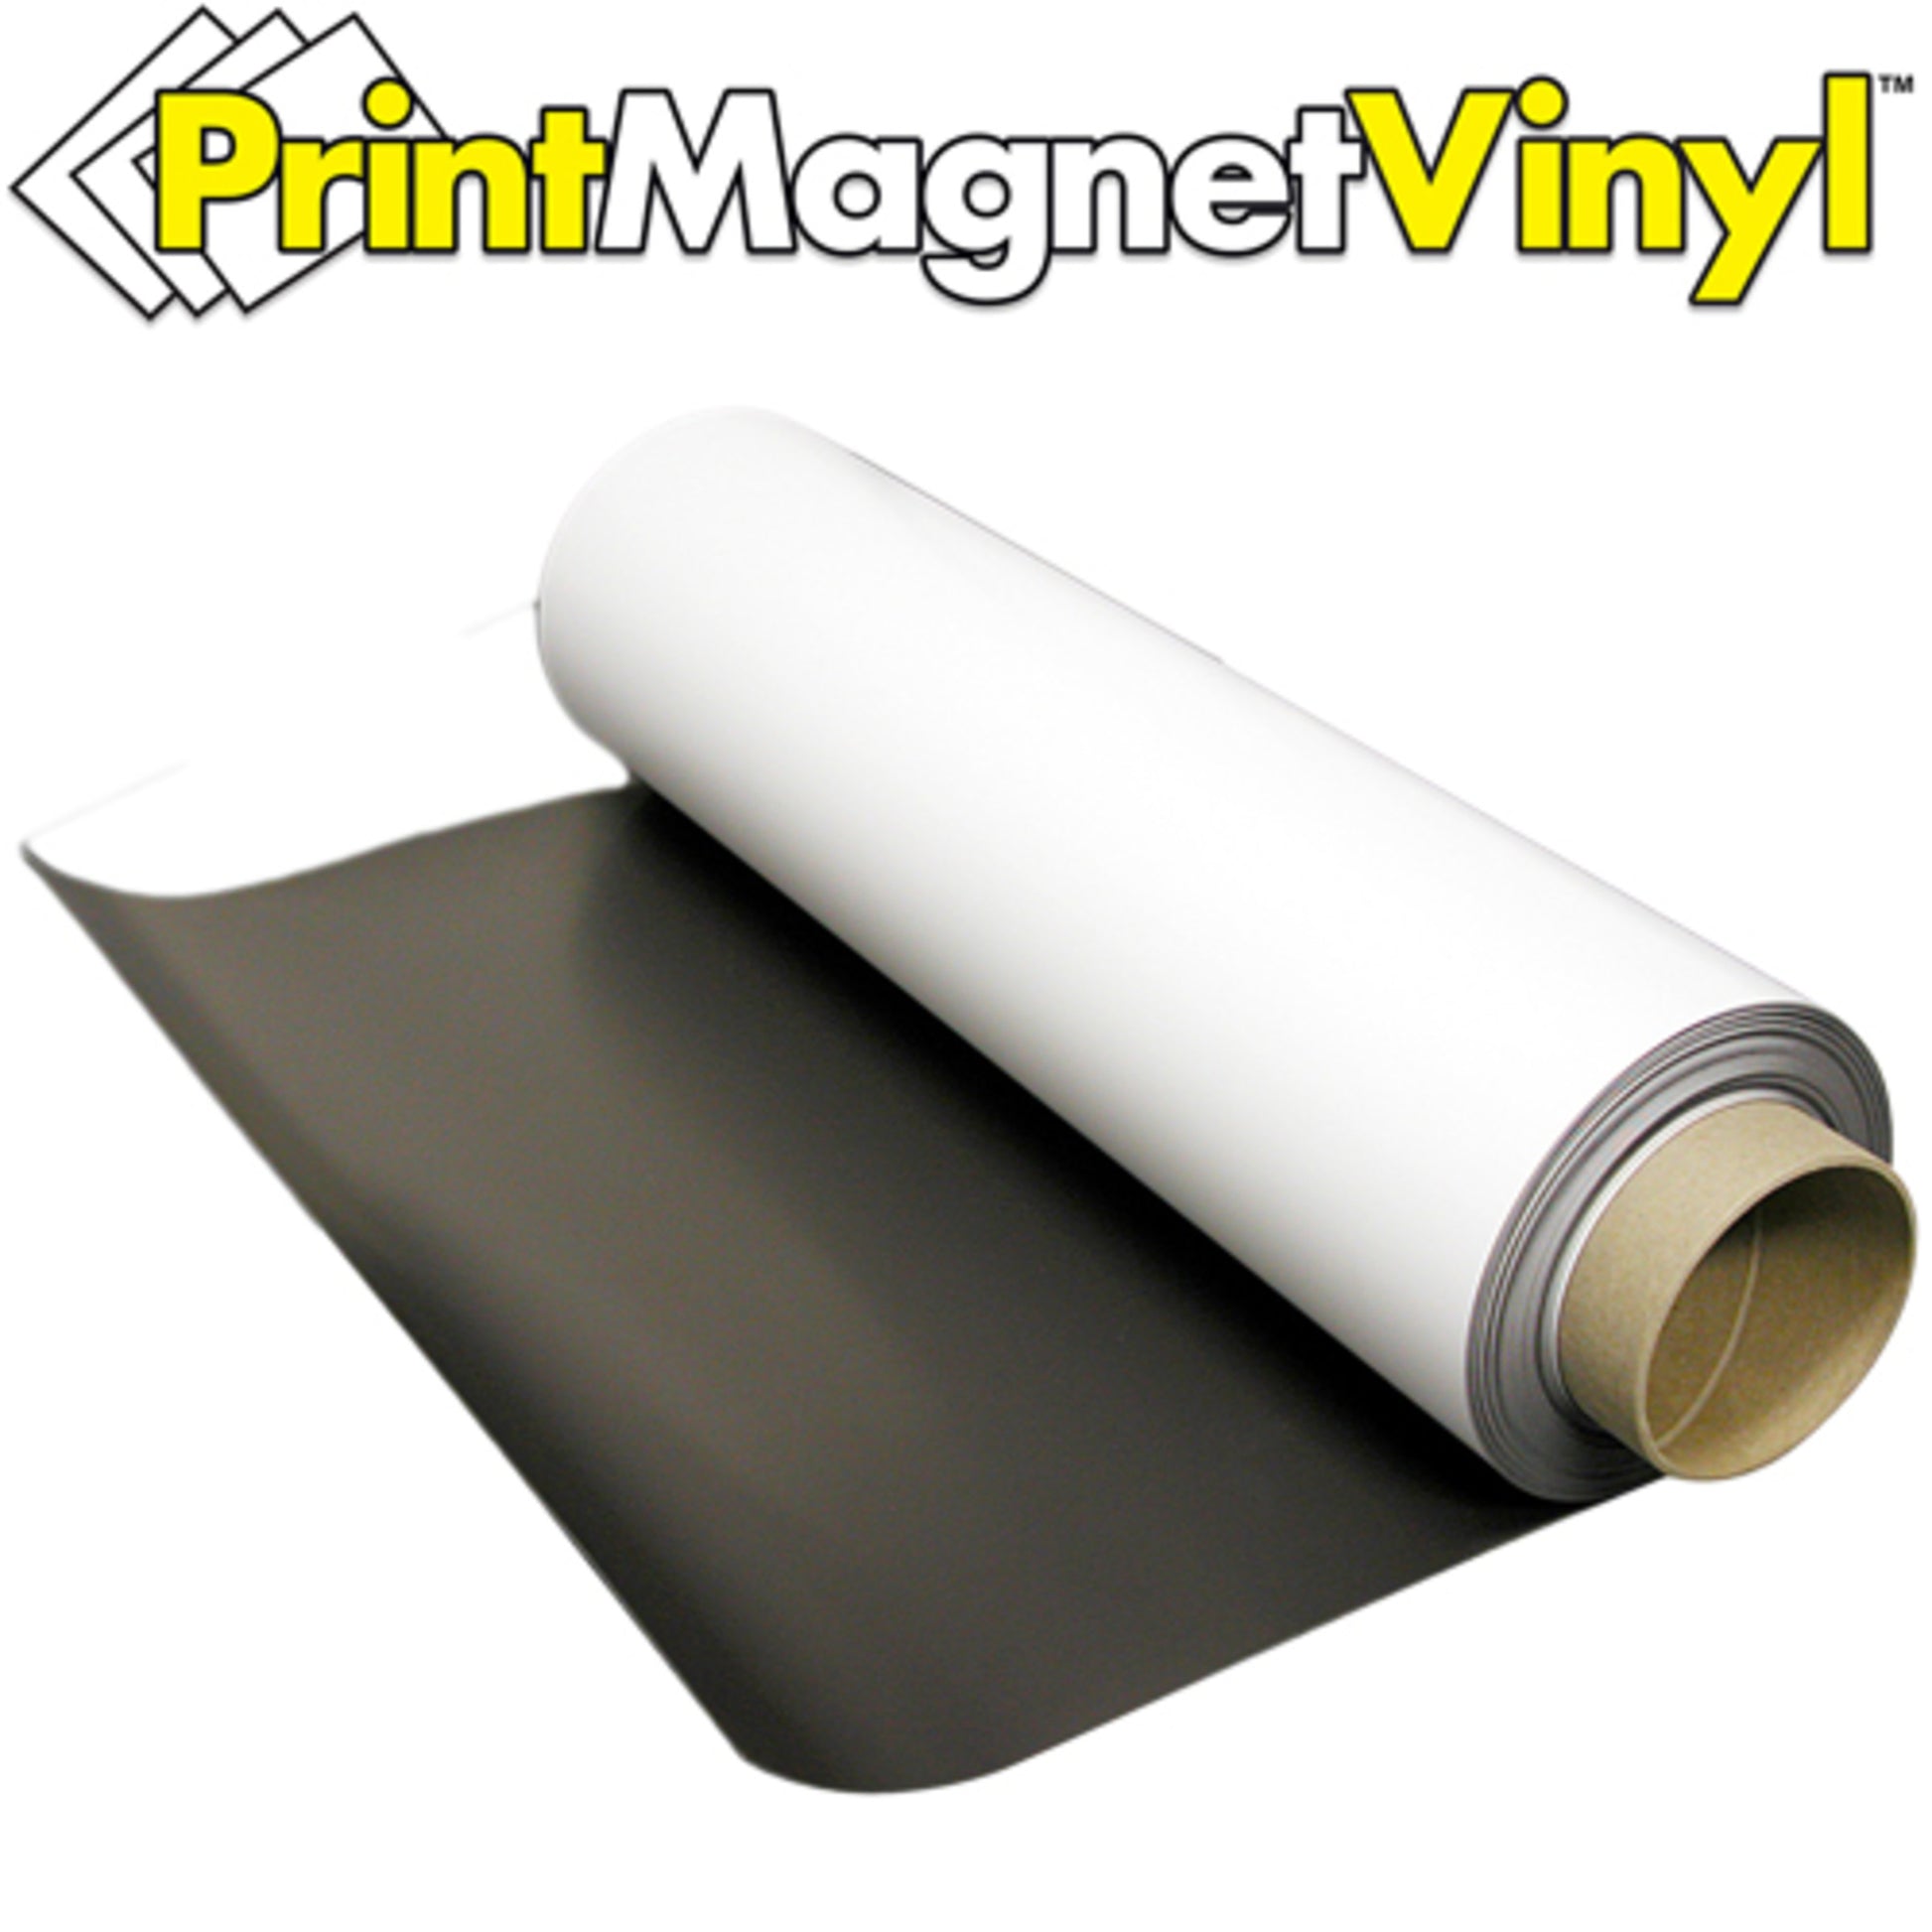 Load image into Gallery viewer, ZG3024GW10F PrintMagnetVinyl™ Flexible Magnetic Sheet - In Use